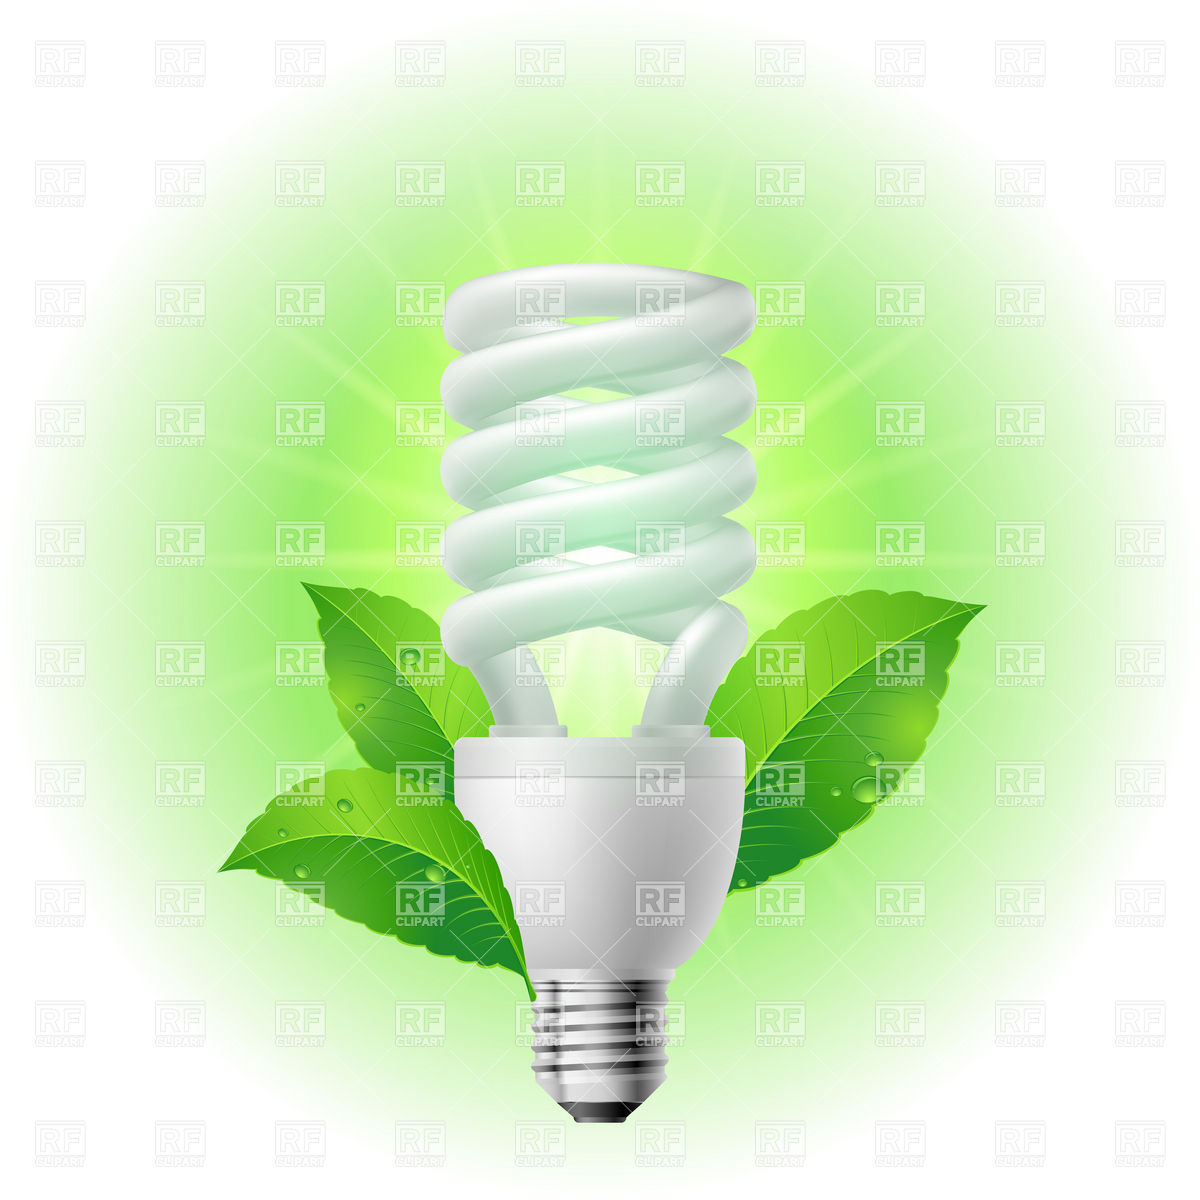 Fluorescent Light Bulb 7033 Download Royalty Free Vector Clipart